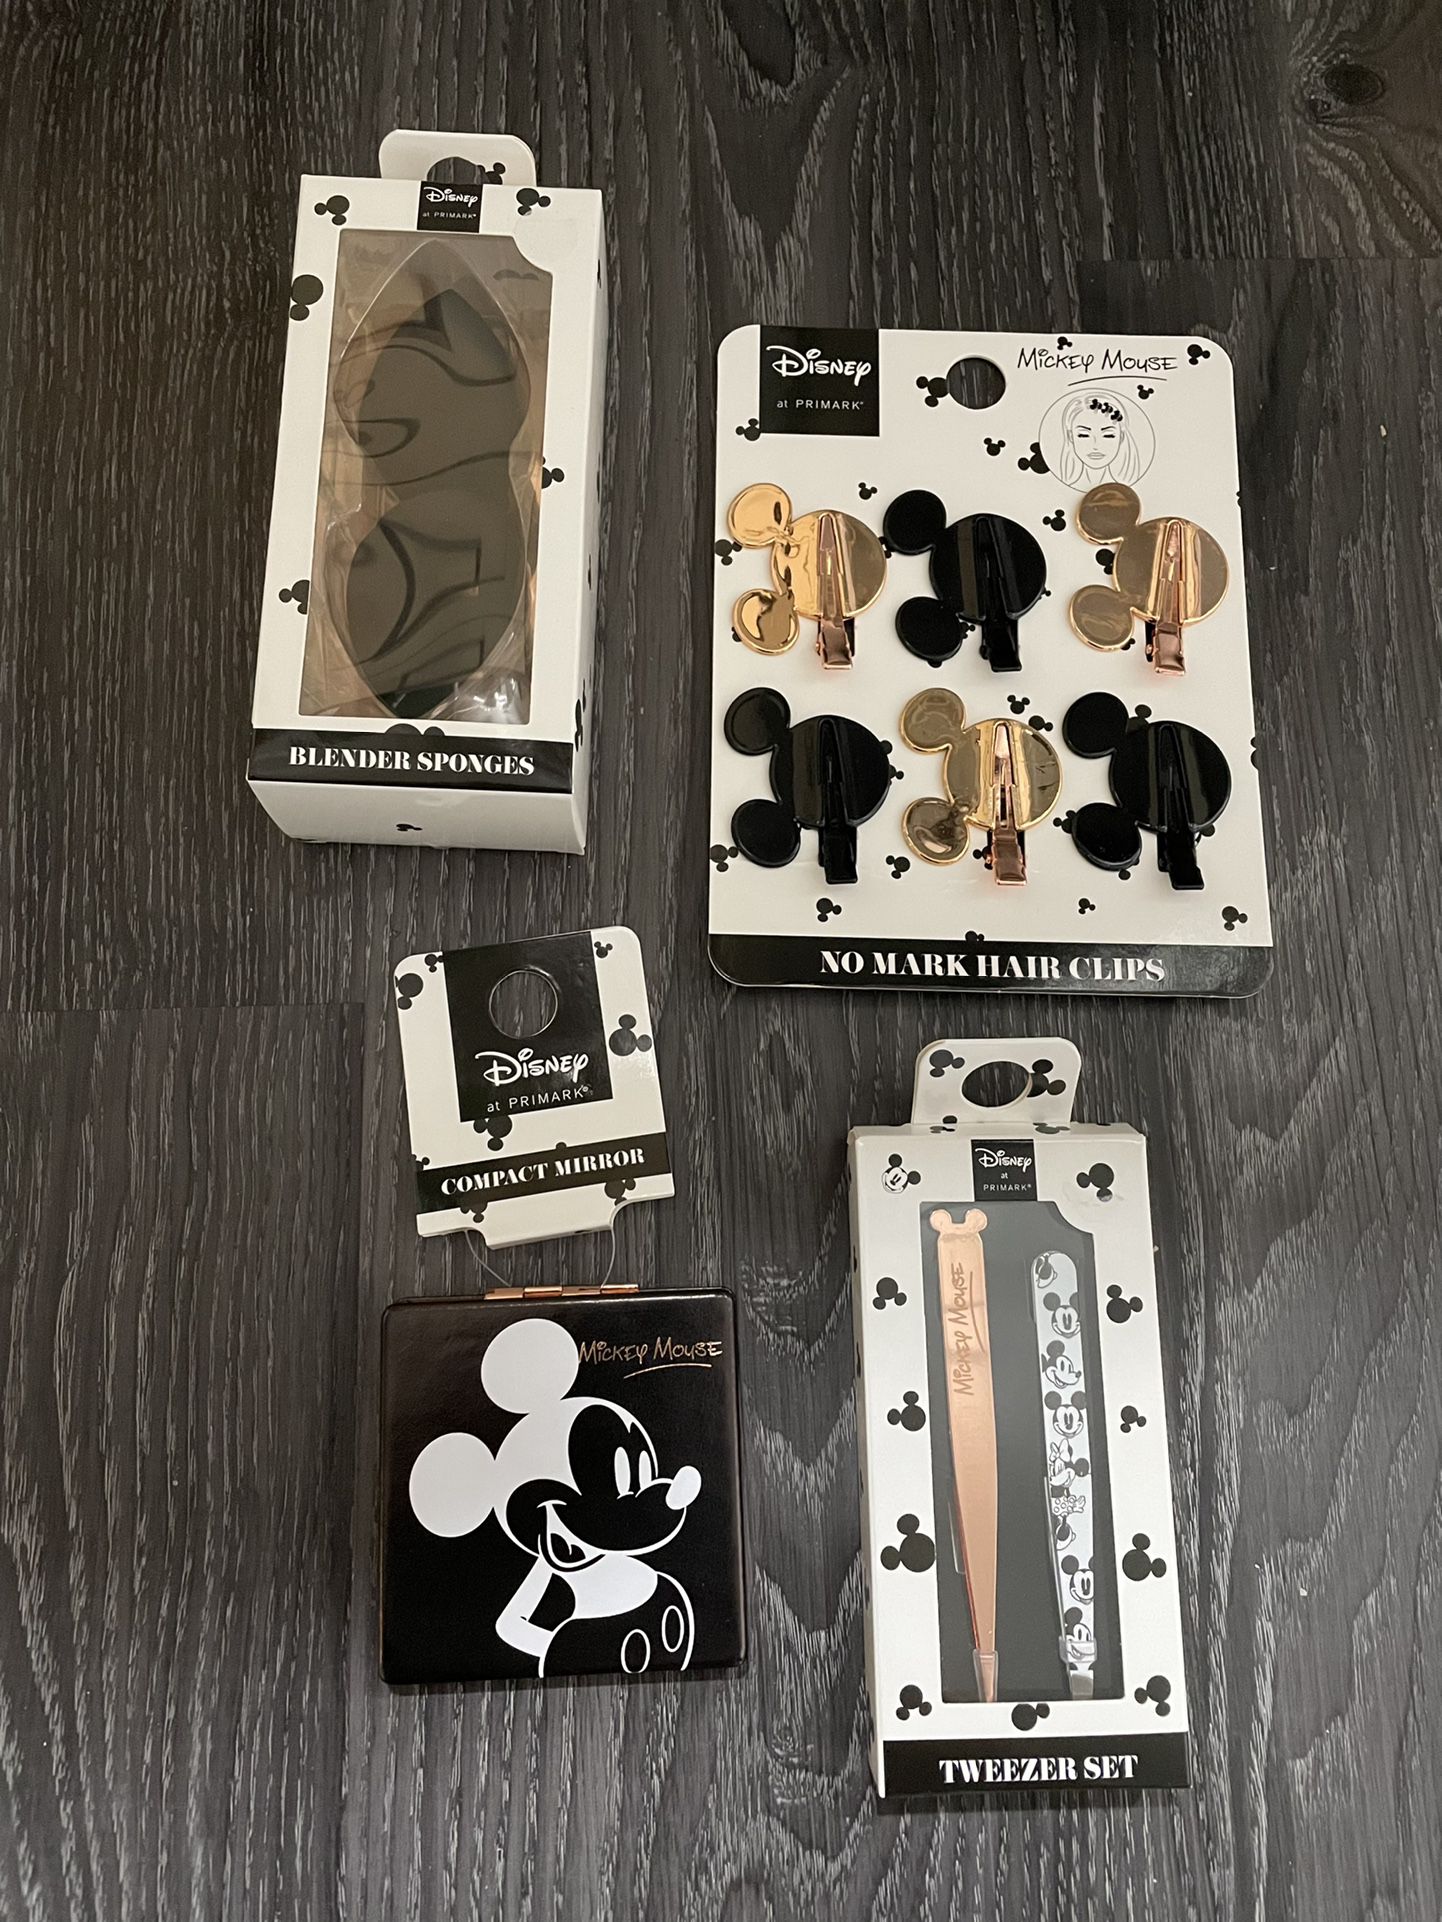 NWT Mickey Mouse Mirror, Tweezer Set, Blender Sponges, And Hair Clips